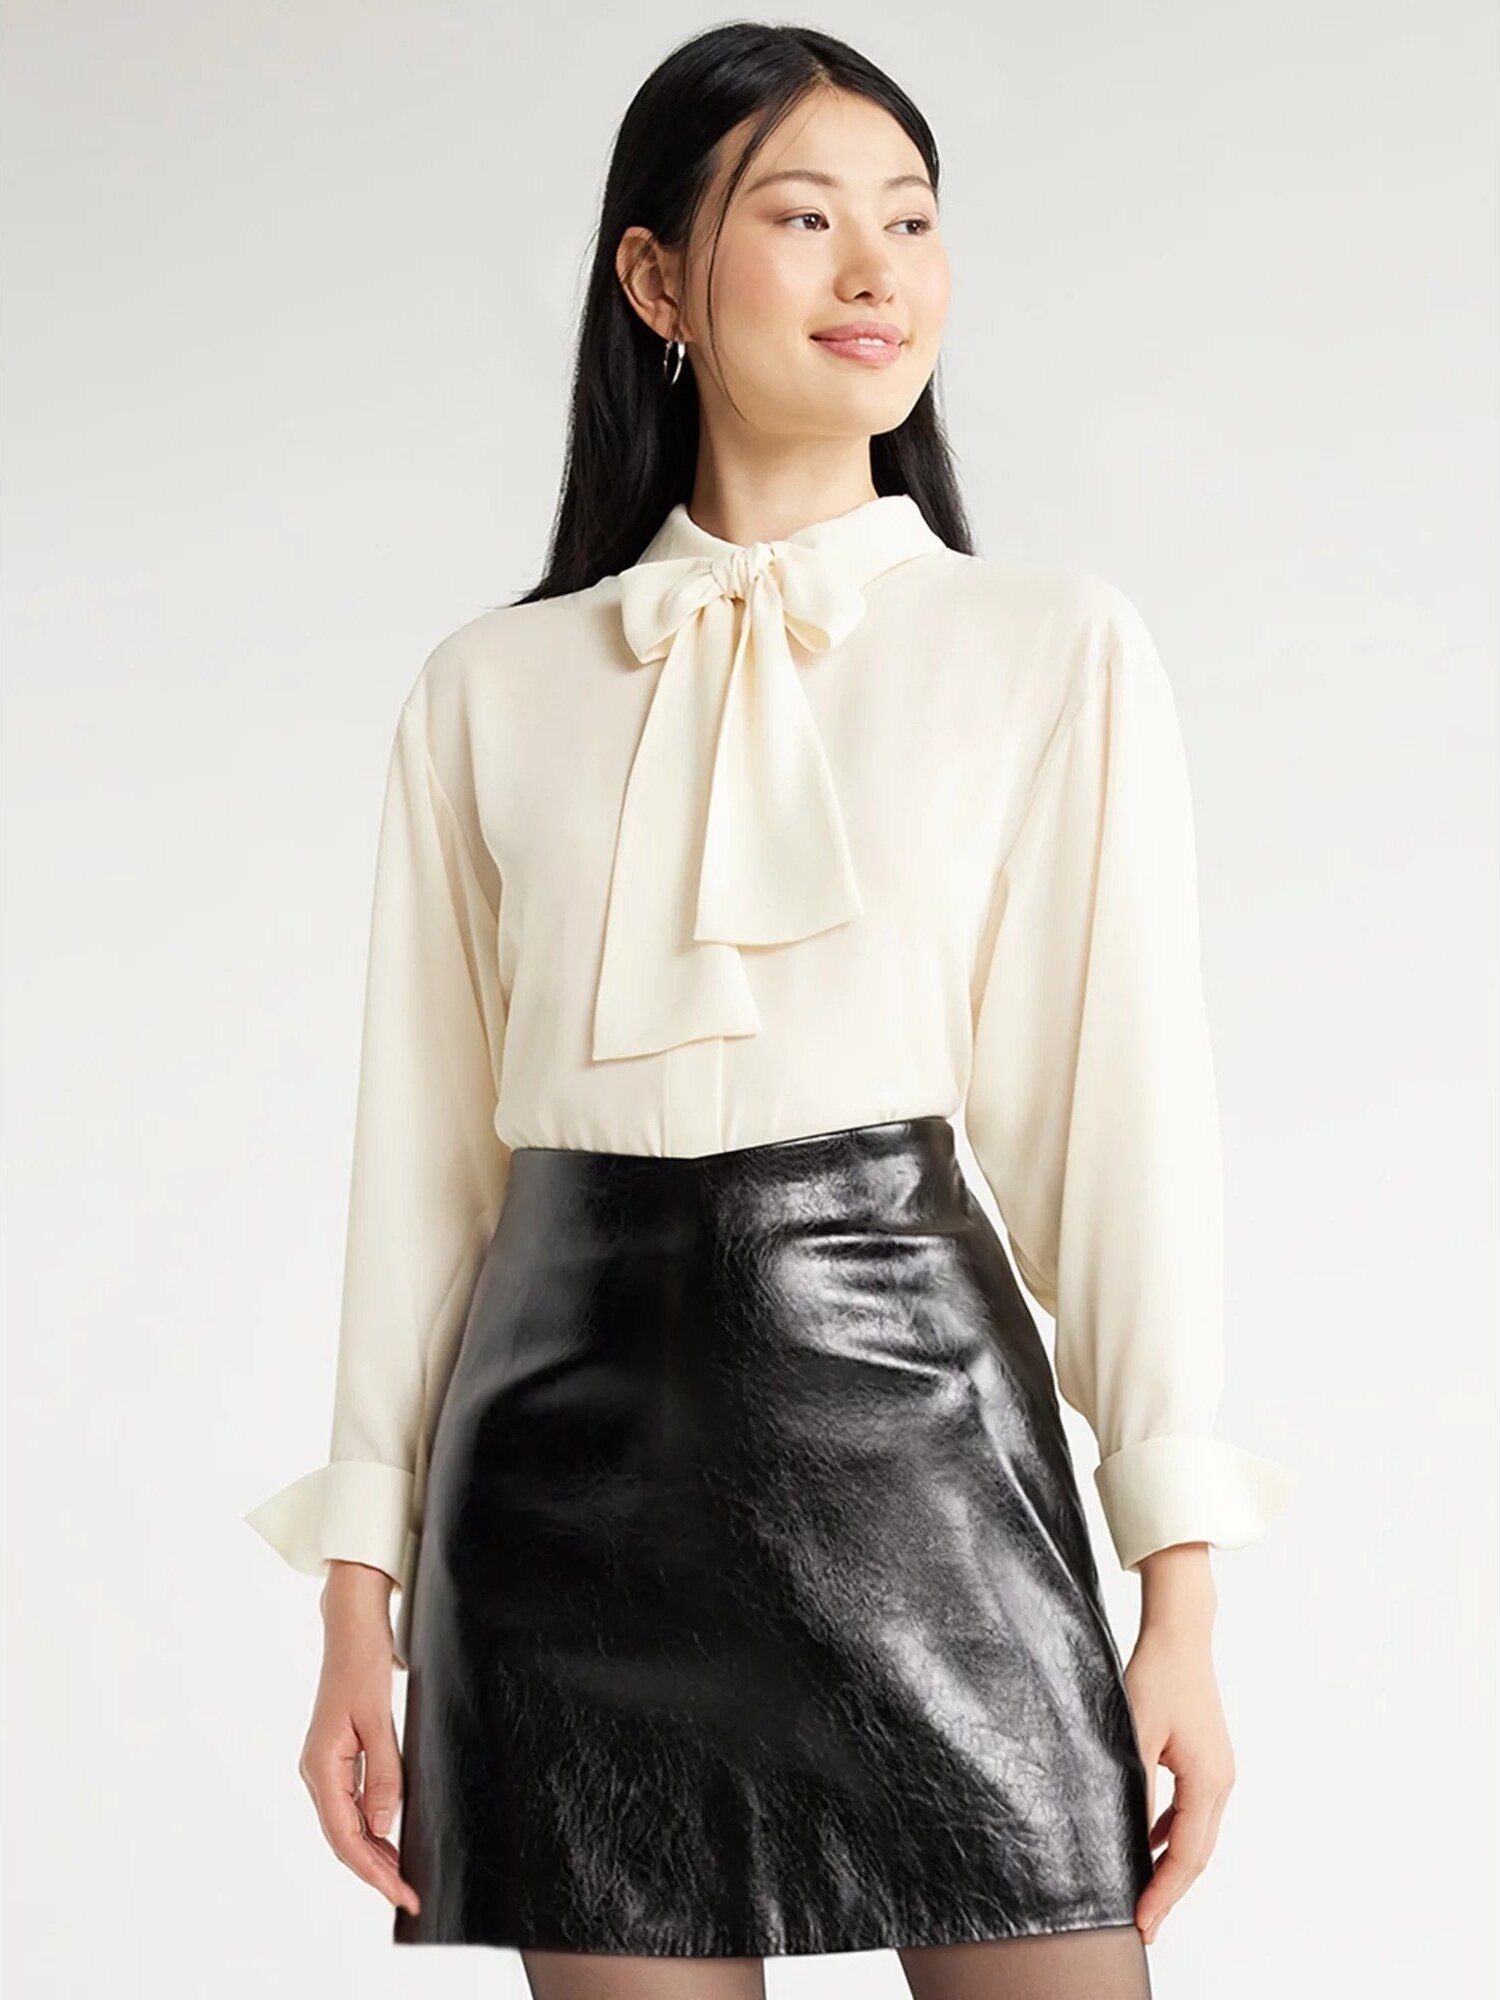 A model wearing the blouse in off-white tucked into a black leather skirt